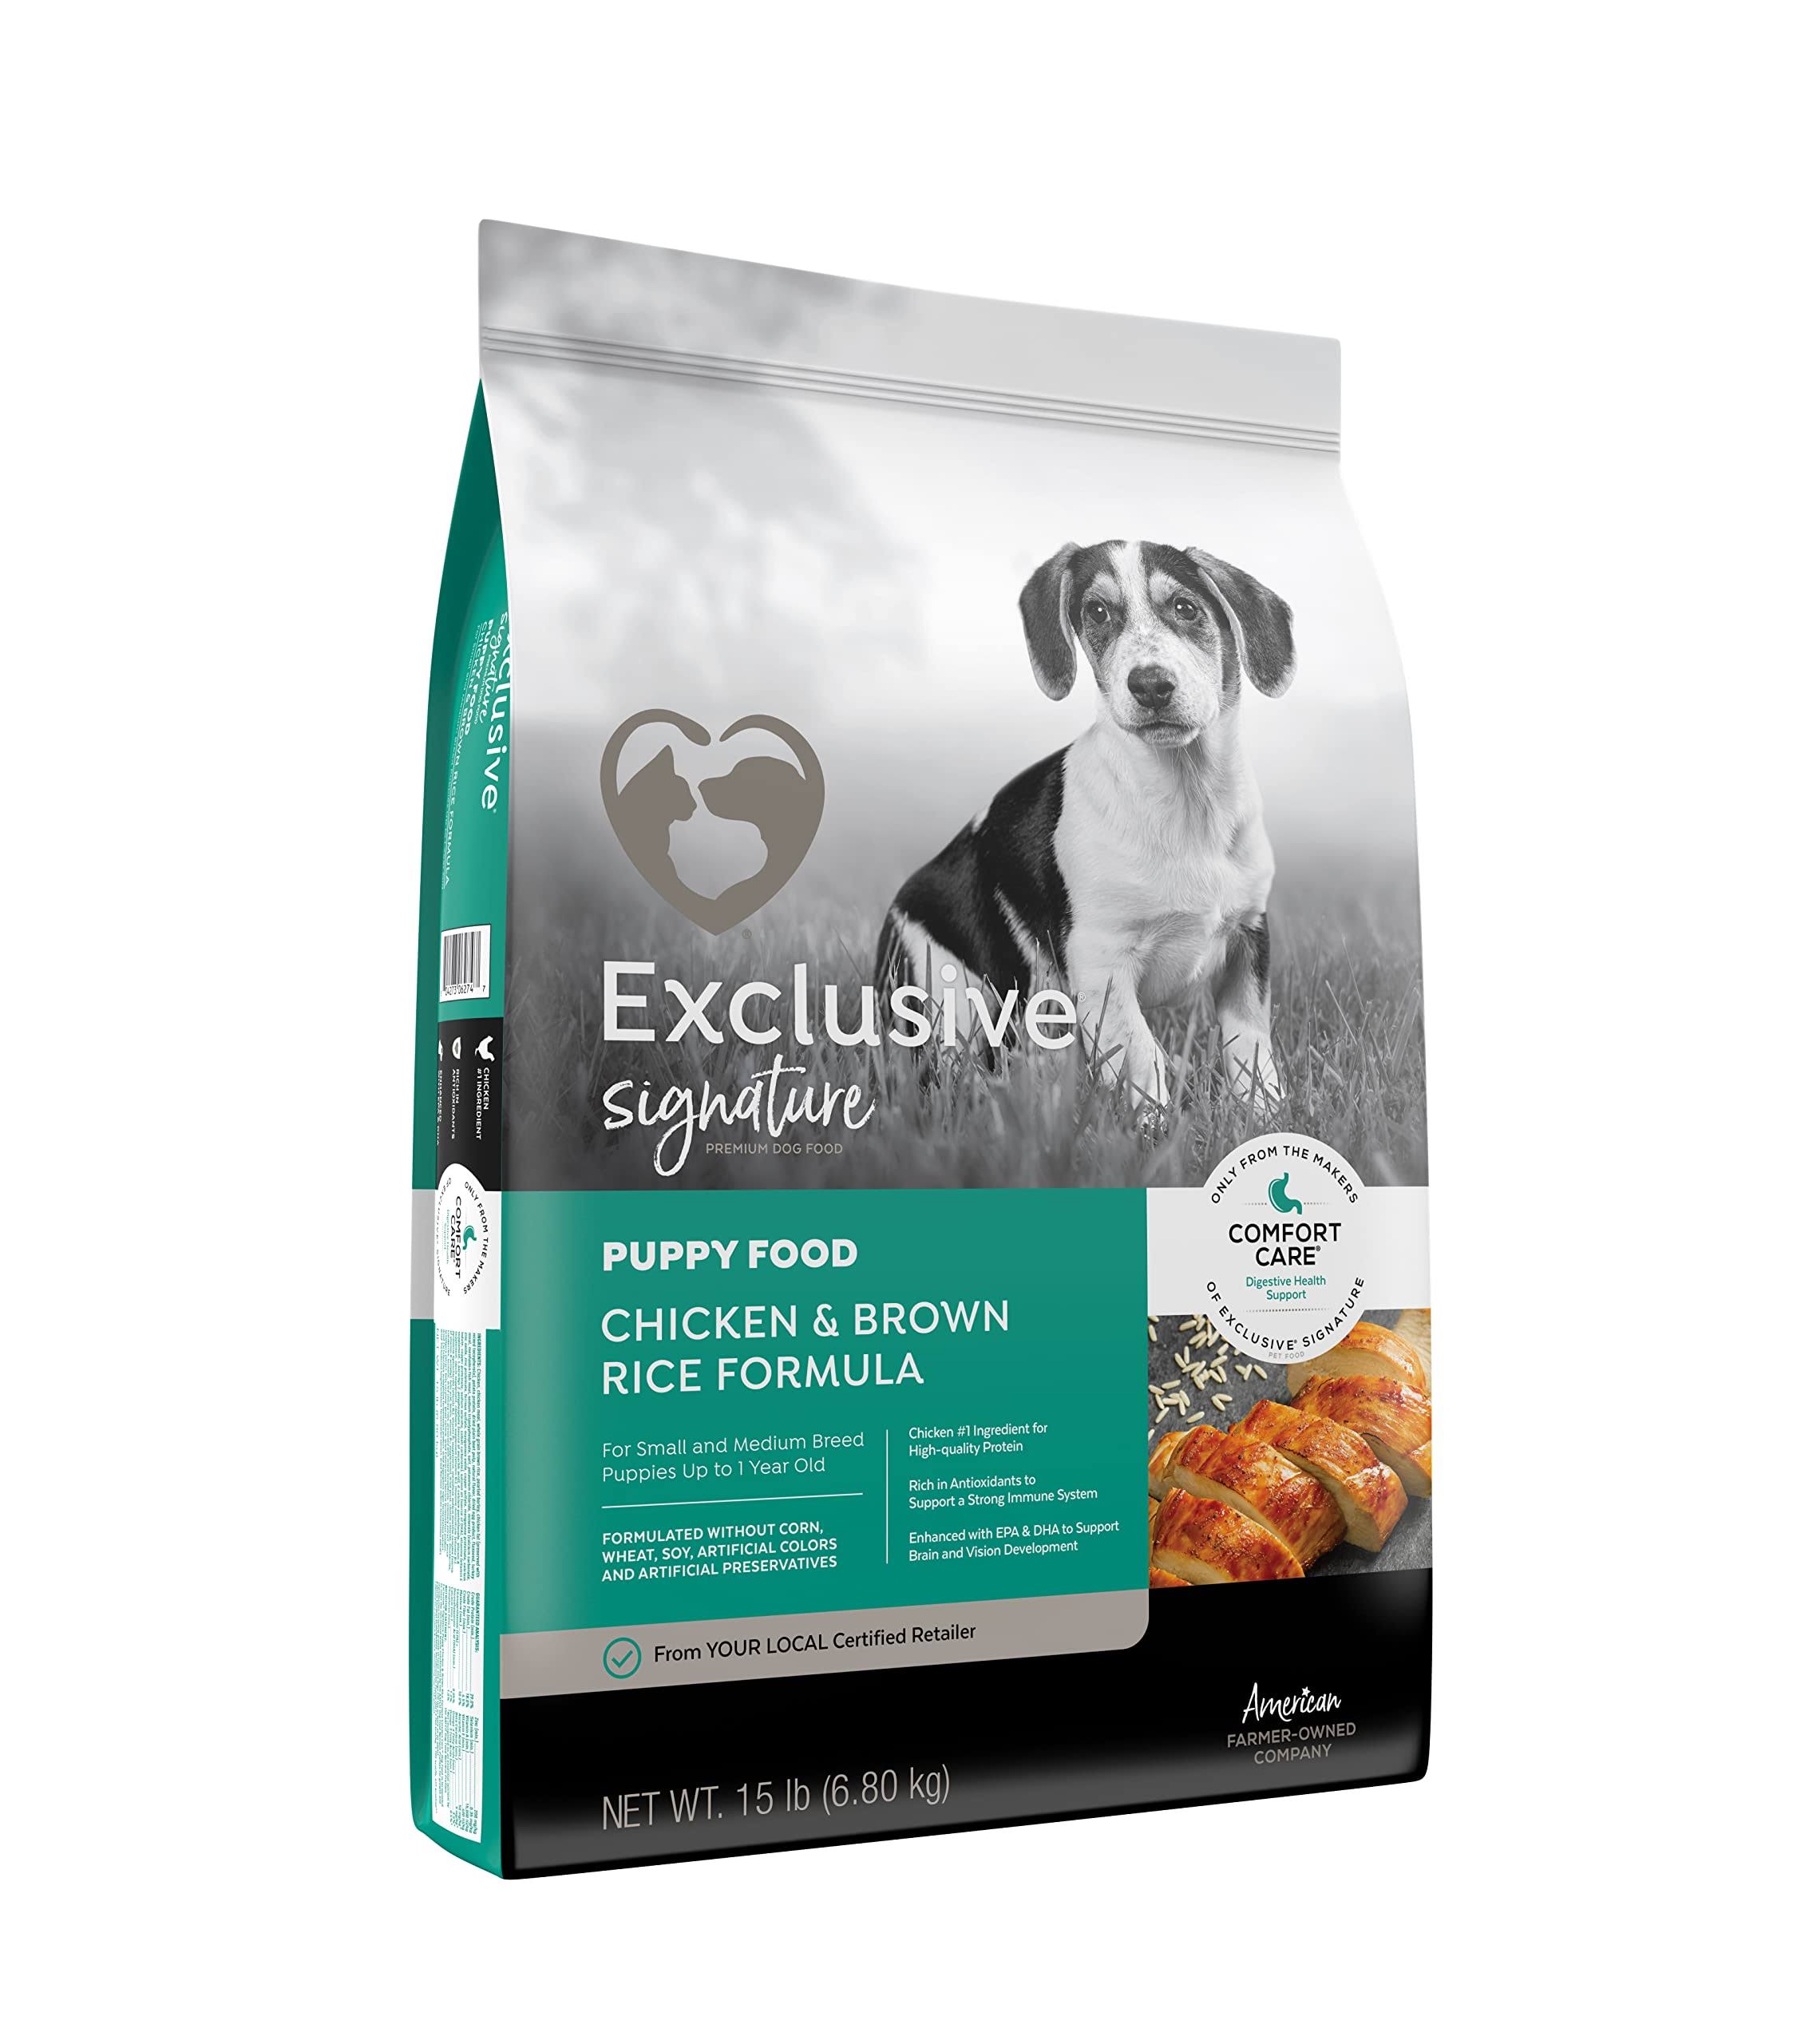 Exclusive Signature Chicken & Brown Rice Puppy Food, 15 lbs